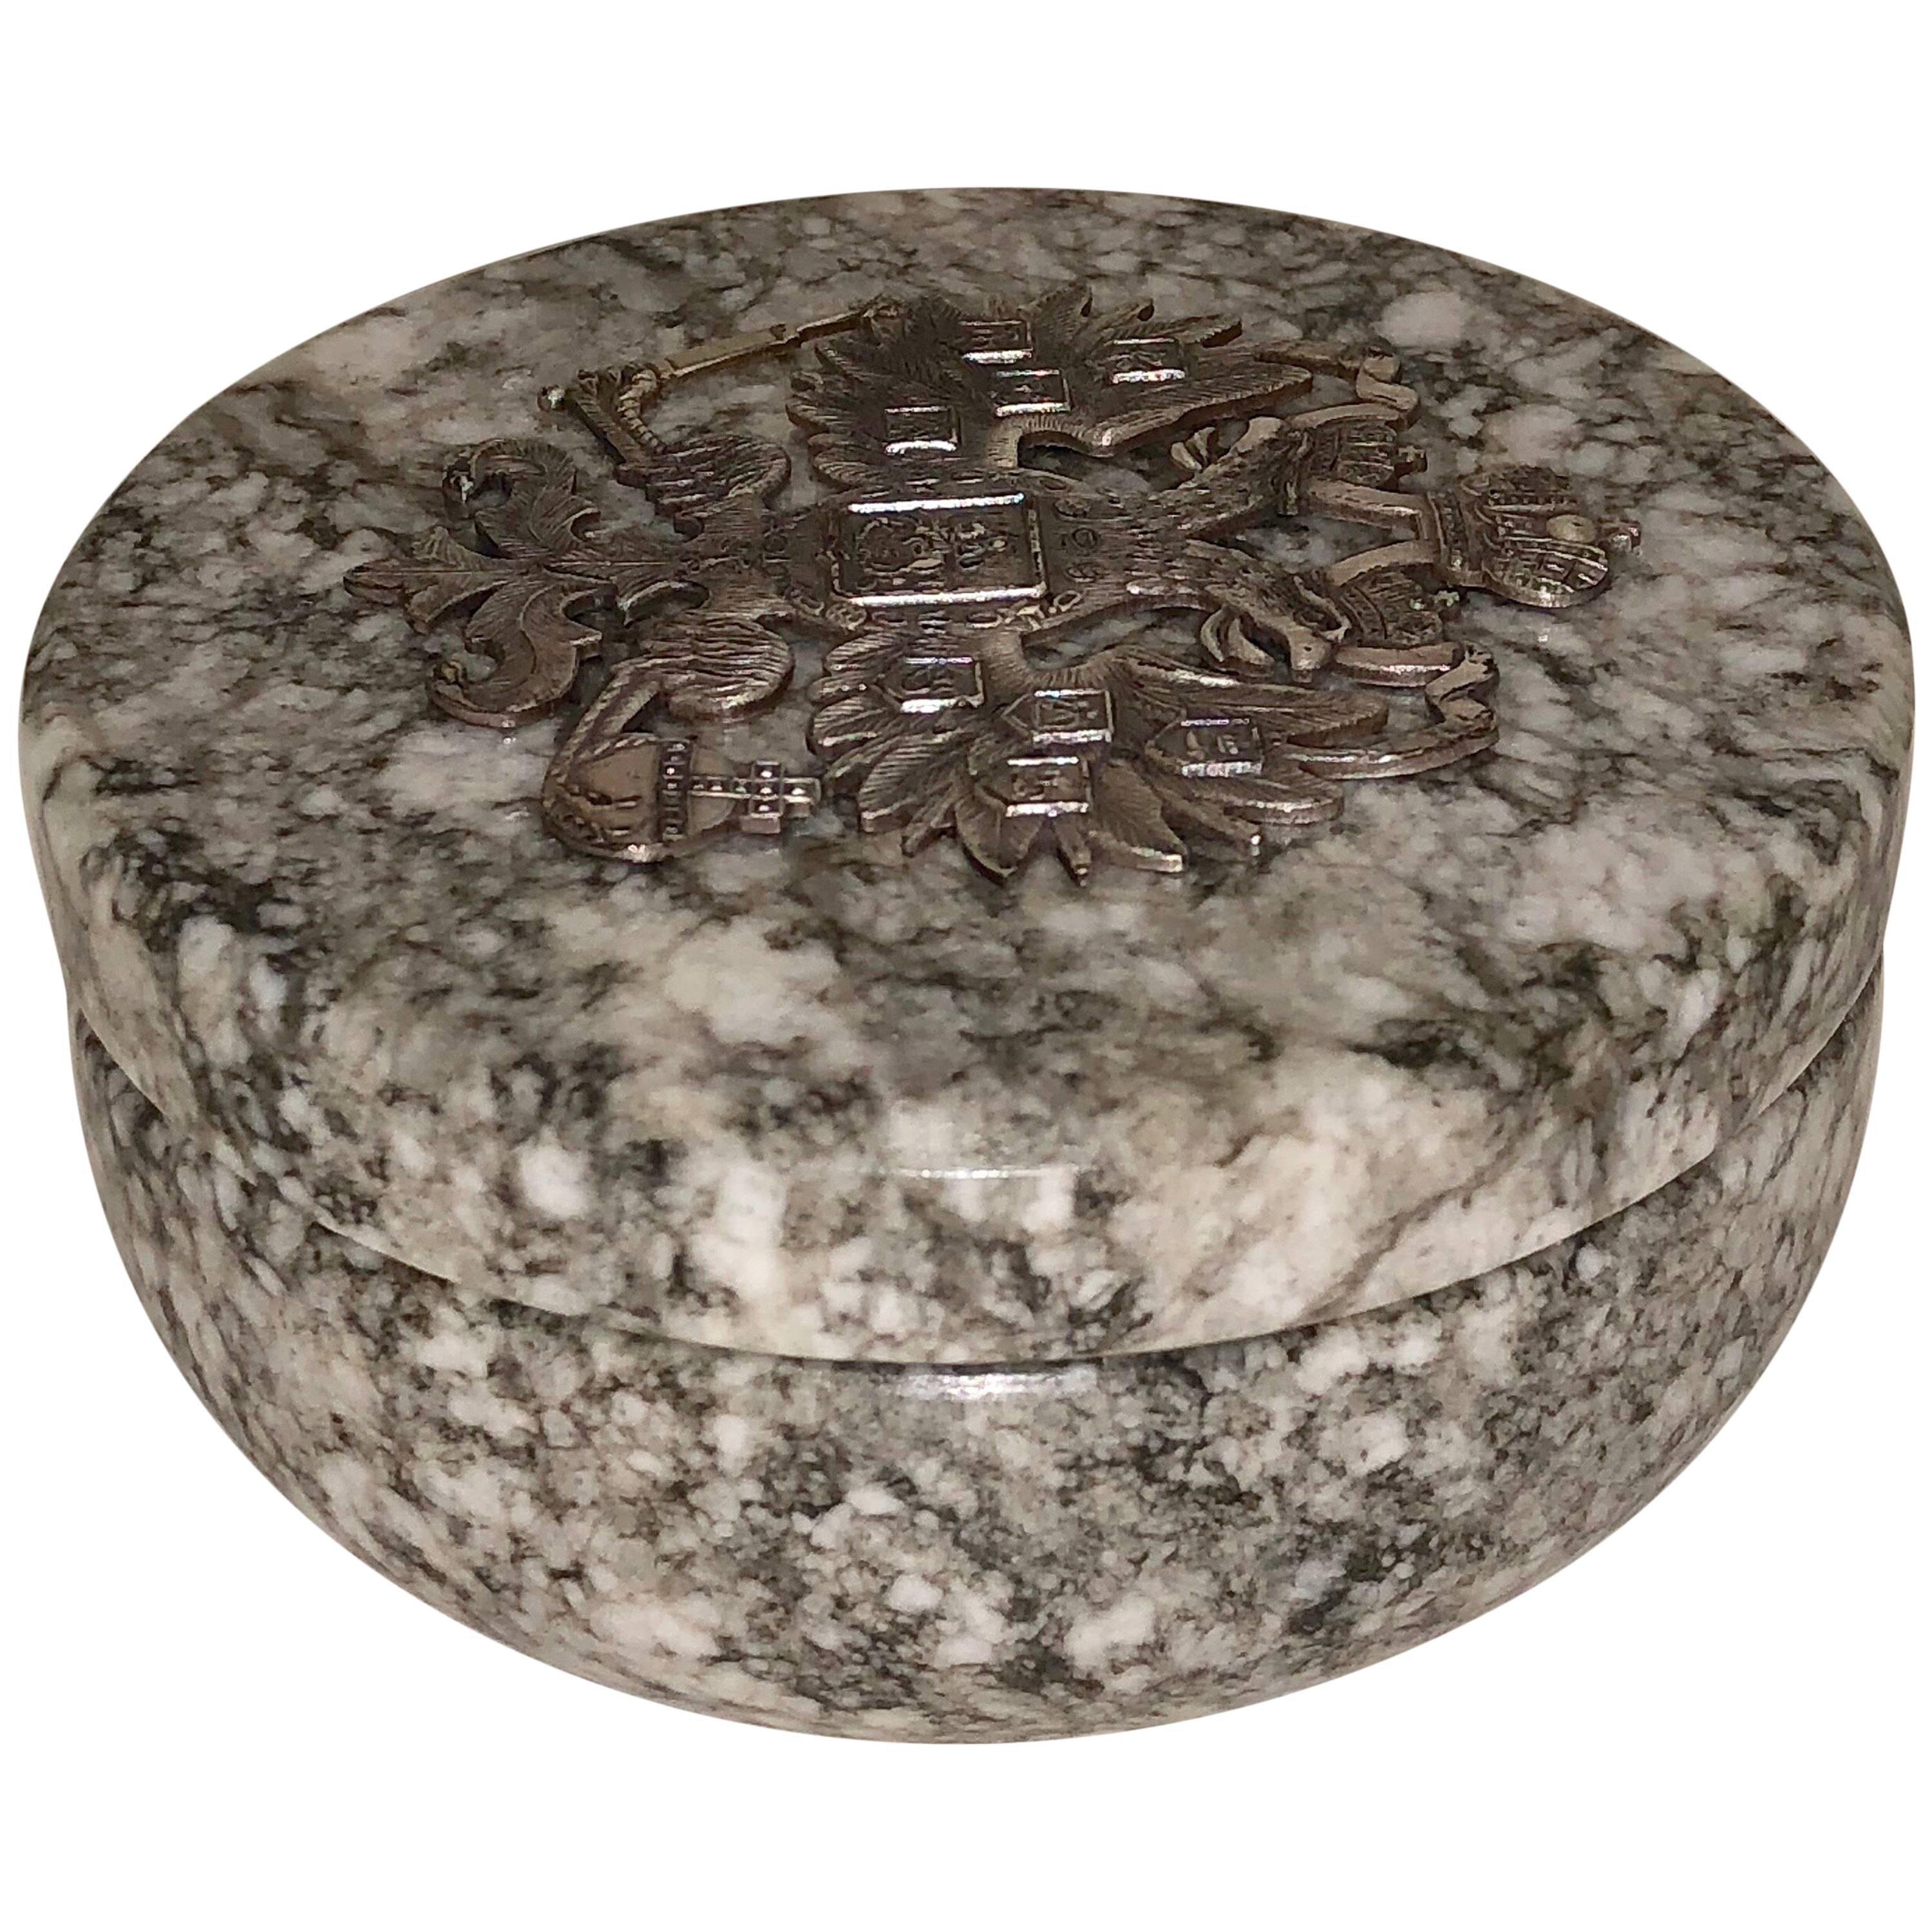 Russian Tiger Skin Marble Round Box, Early 20th Century For Sale